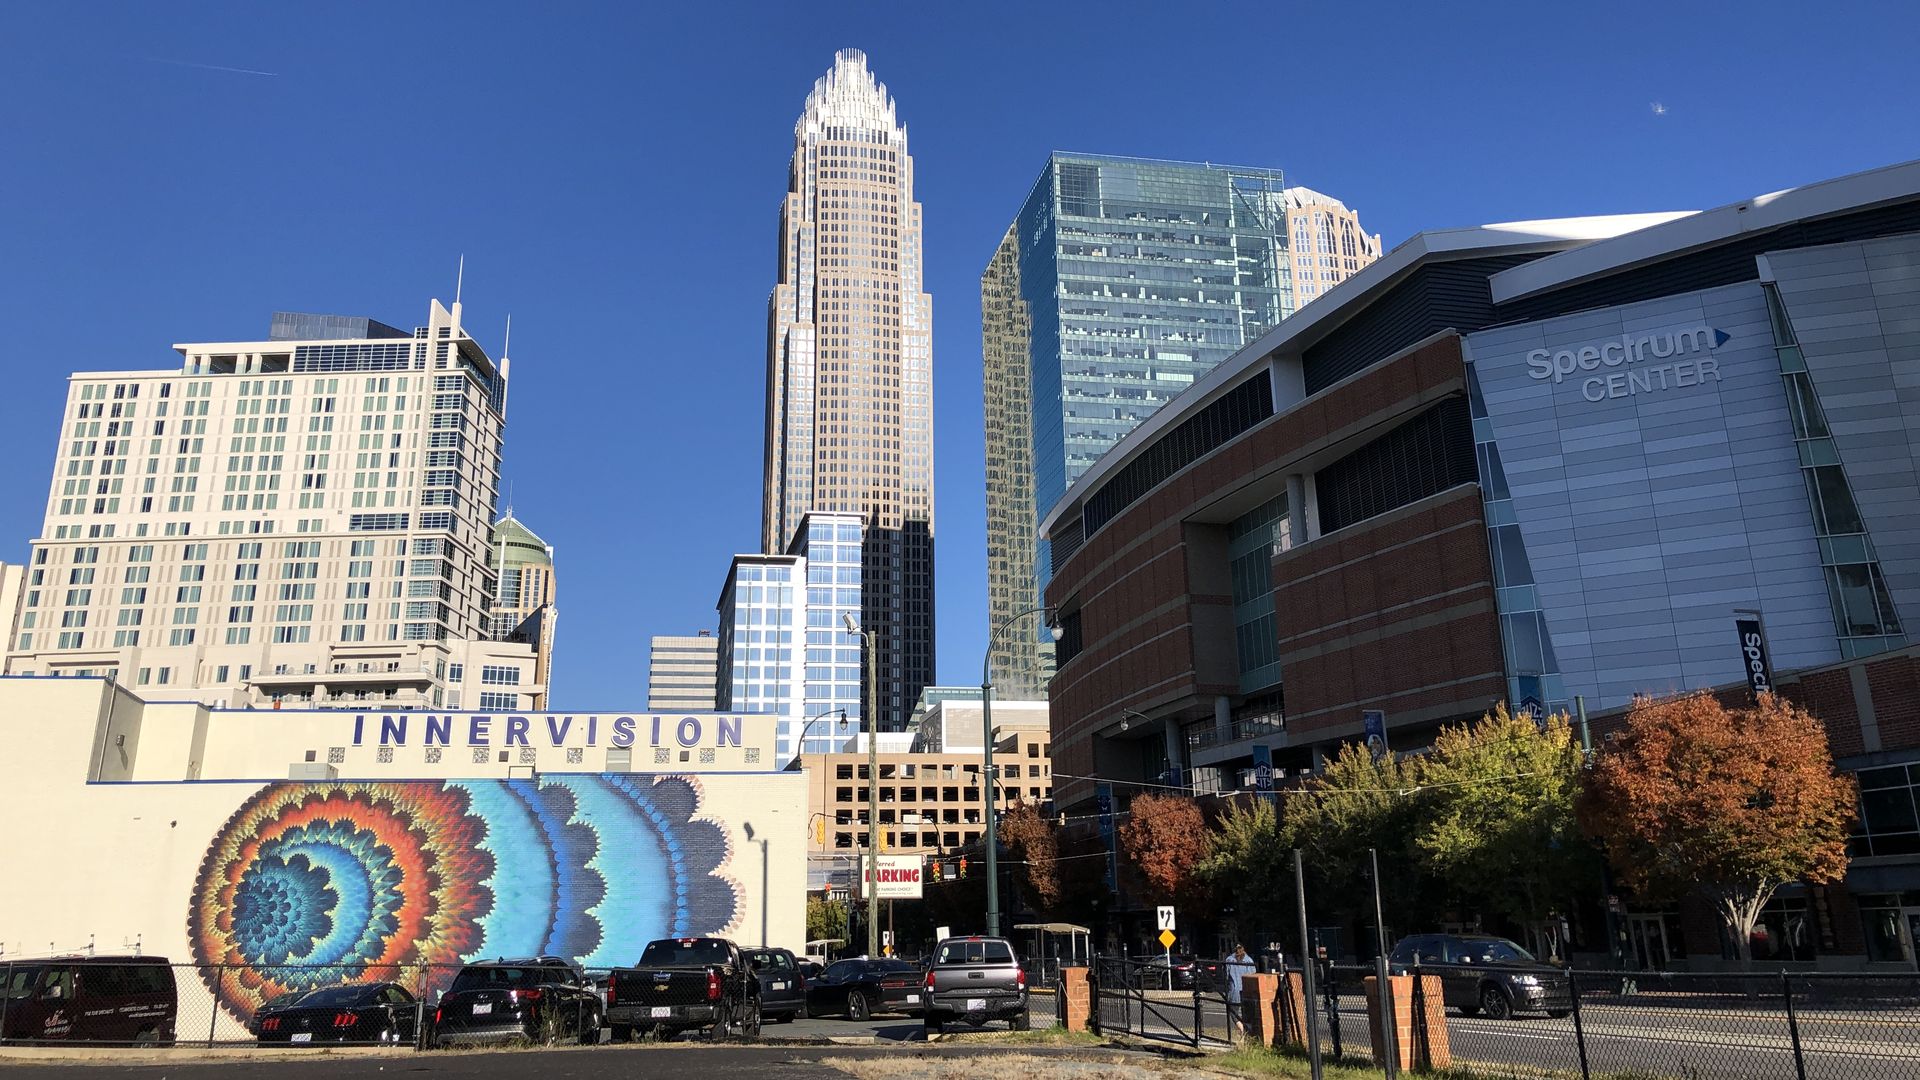 The Spectrum Center in Charlotte, NC